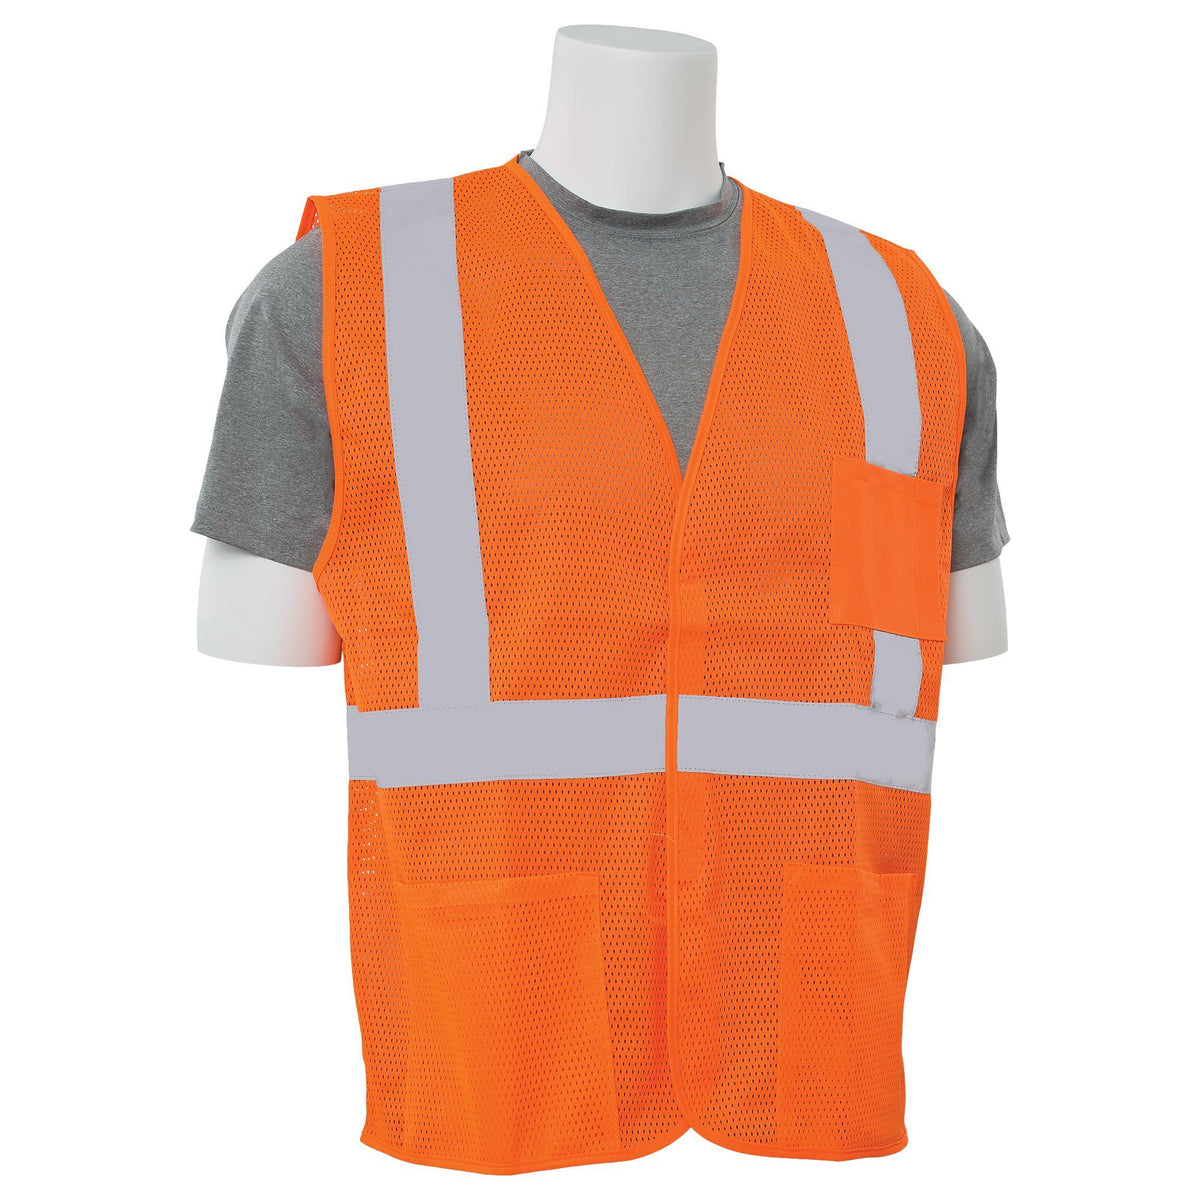 S362P Class 2 Economy Mesh Safety Vest with Pockets 1pc